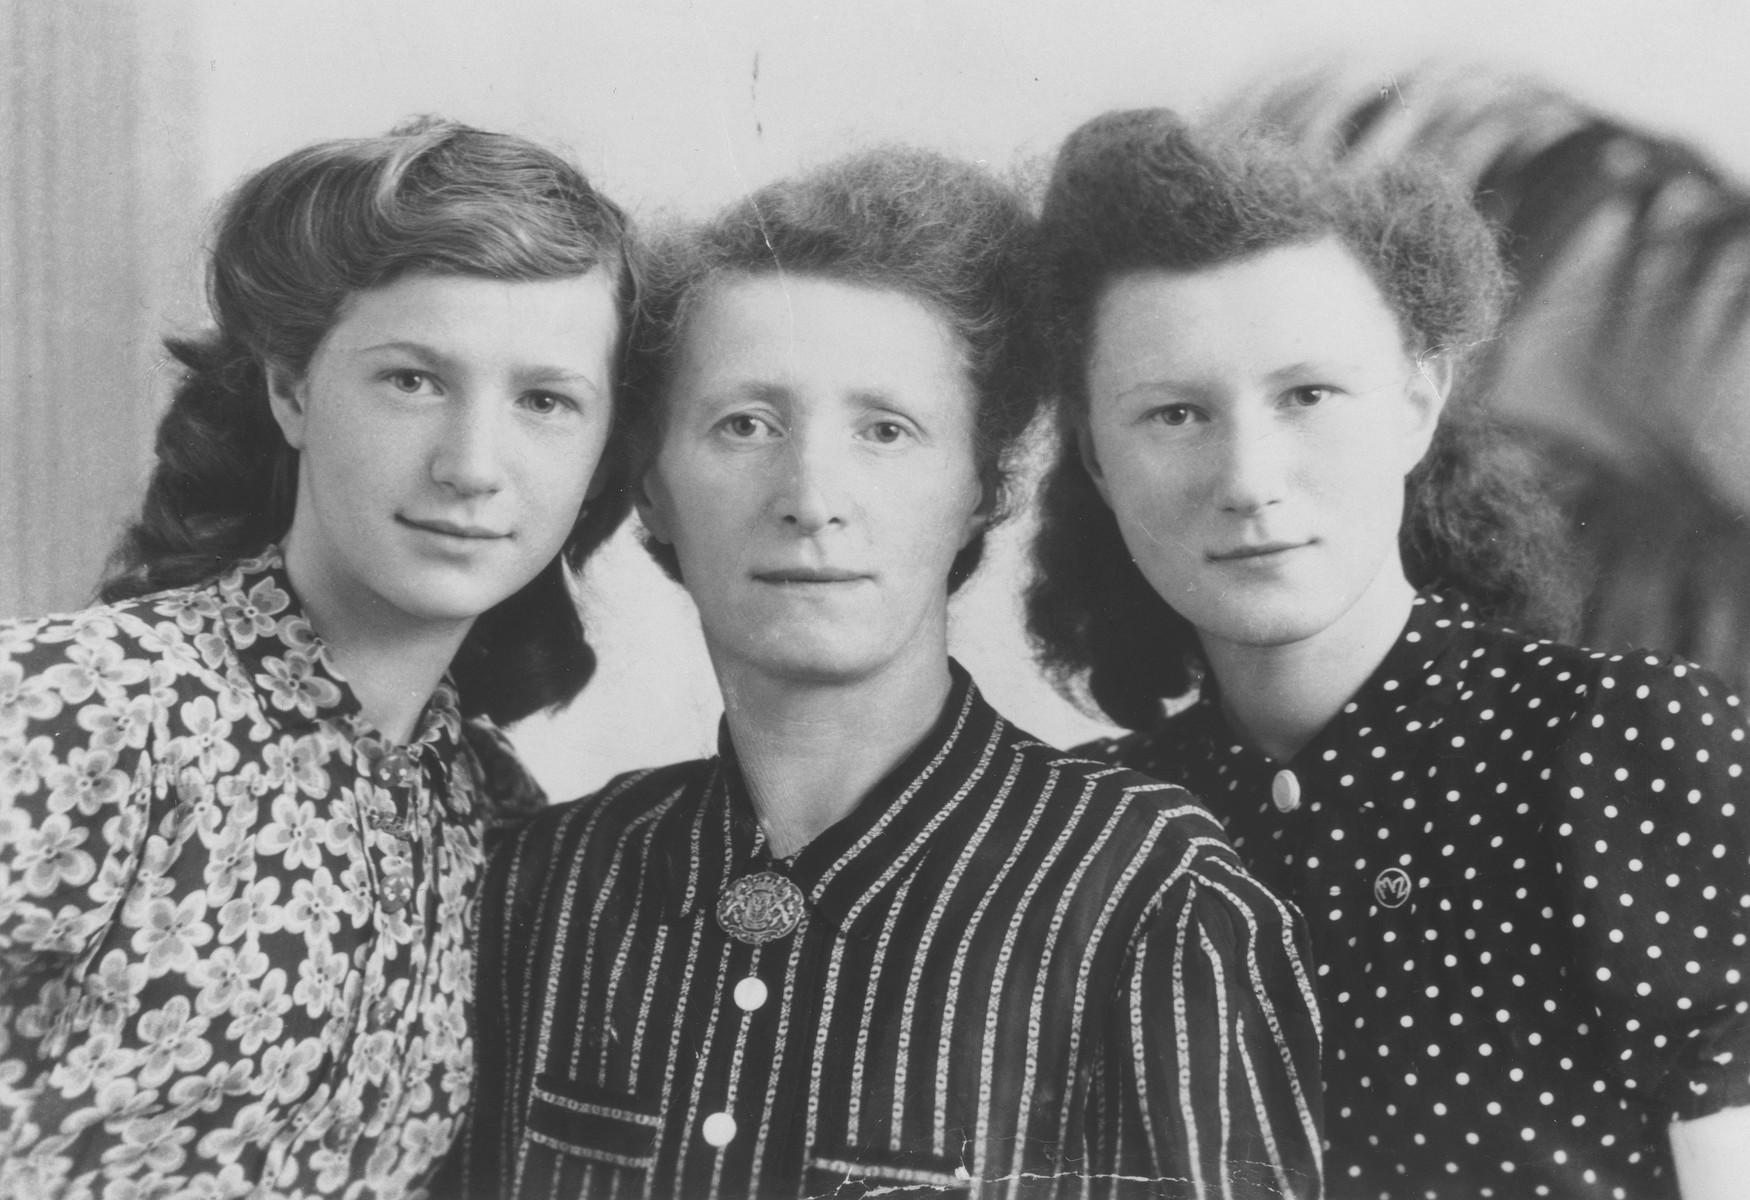 Portrait of a Dutch Jewish woman with her two daughters in the Westerbork transit camp.

Pictured are Gisela Zimet (center) with her two daughters, Salla (left) and Minna (right).